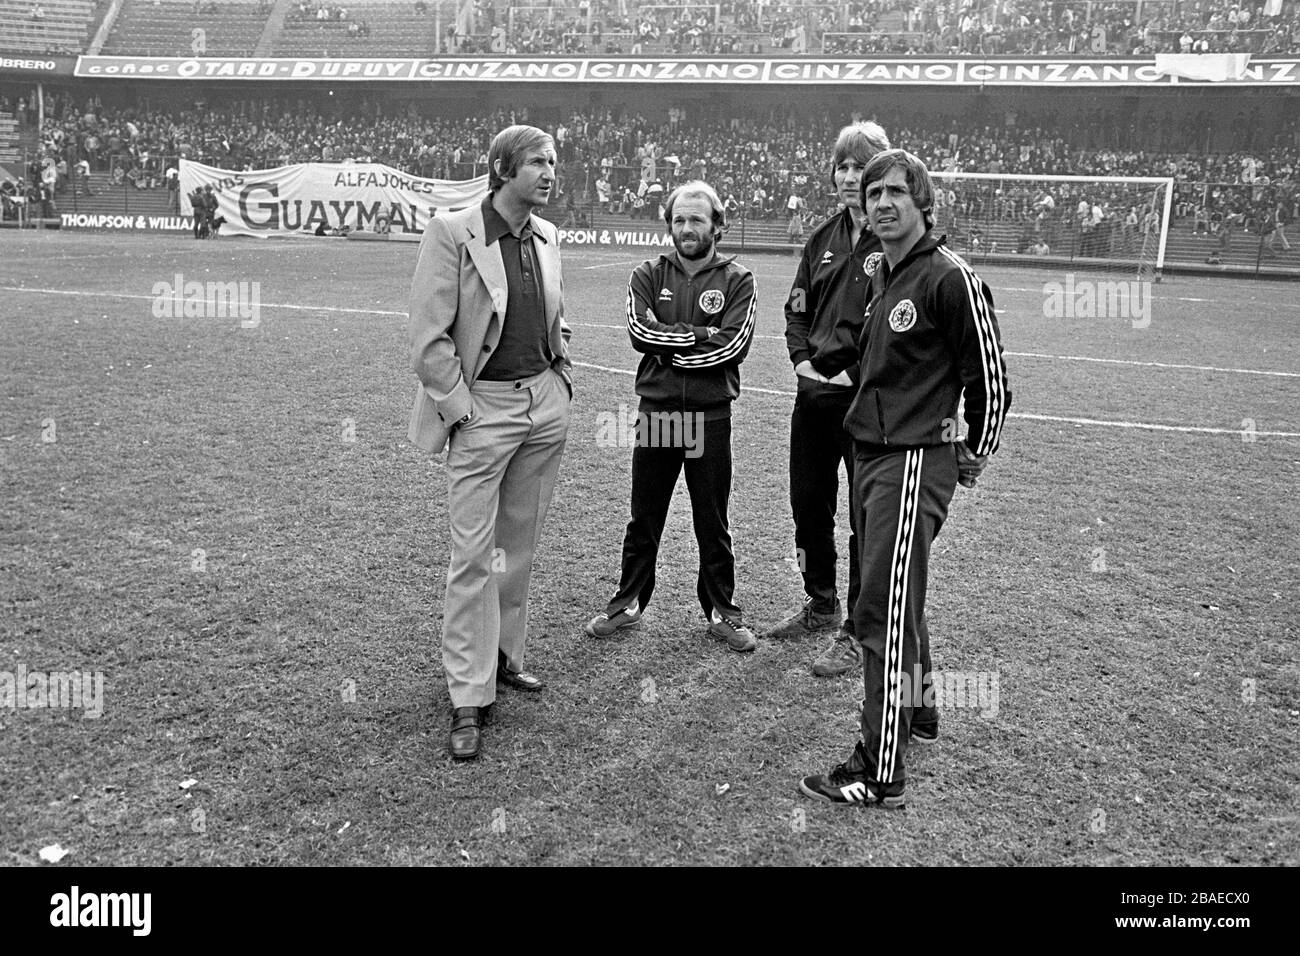 Scotland's Archie Gemmill (second l), Alan Rough (second r) and Don Masson (r) survey the stadium with manager Ally MacLeod (l) before the match Stock Photo